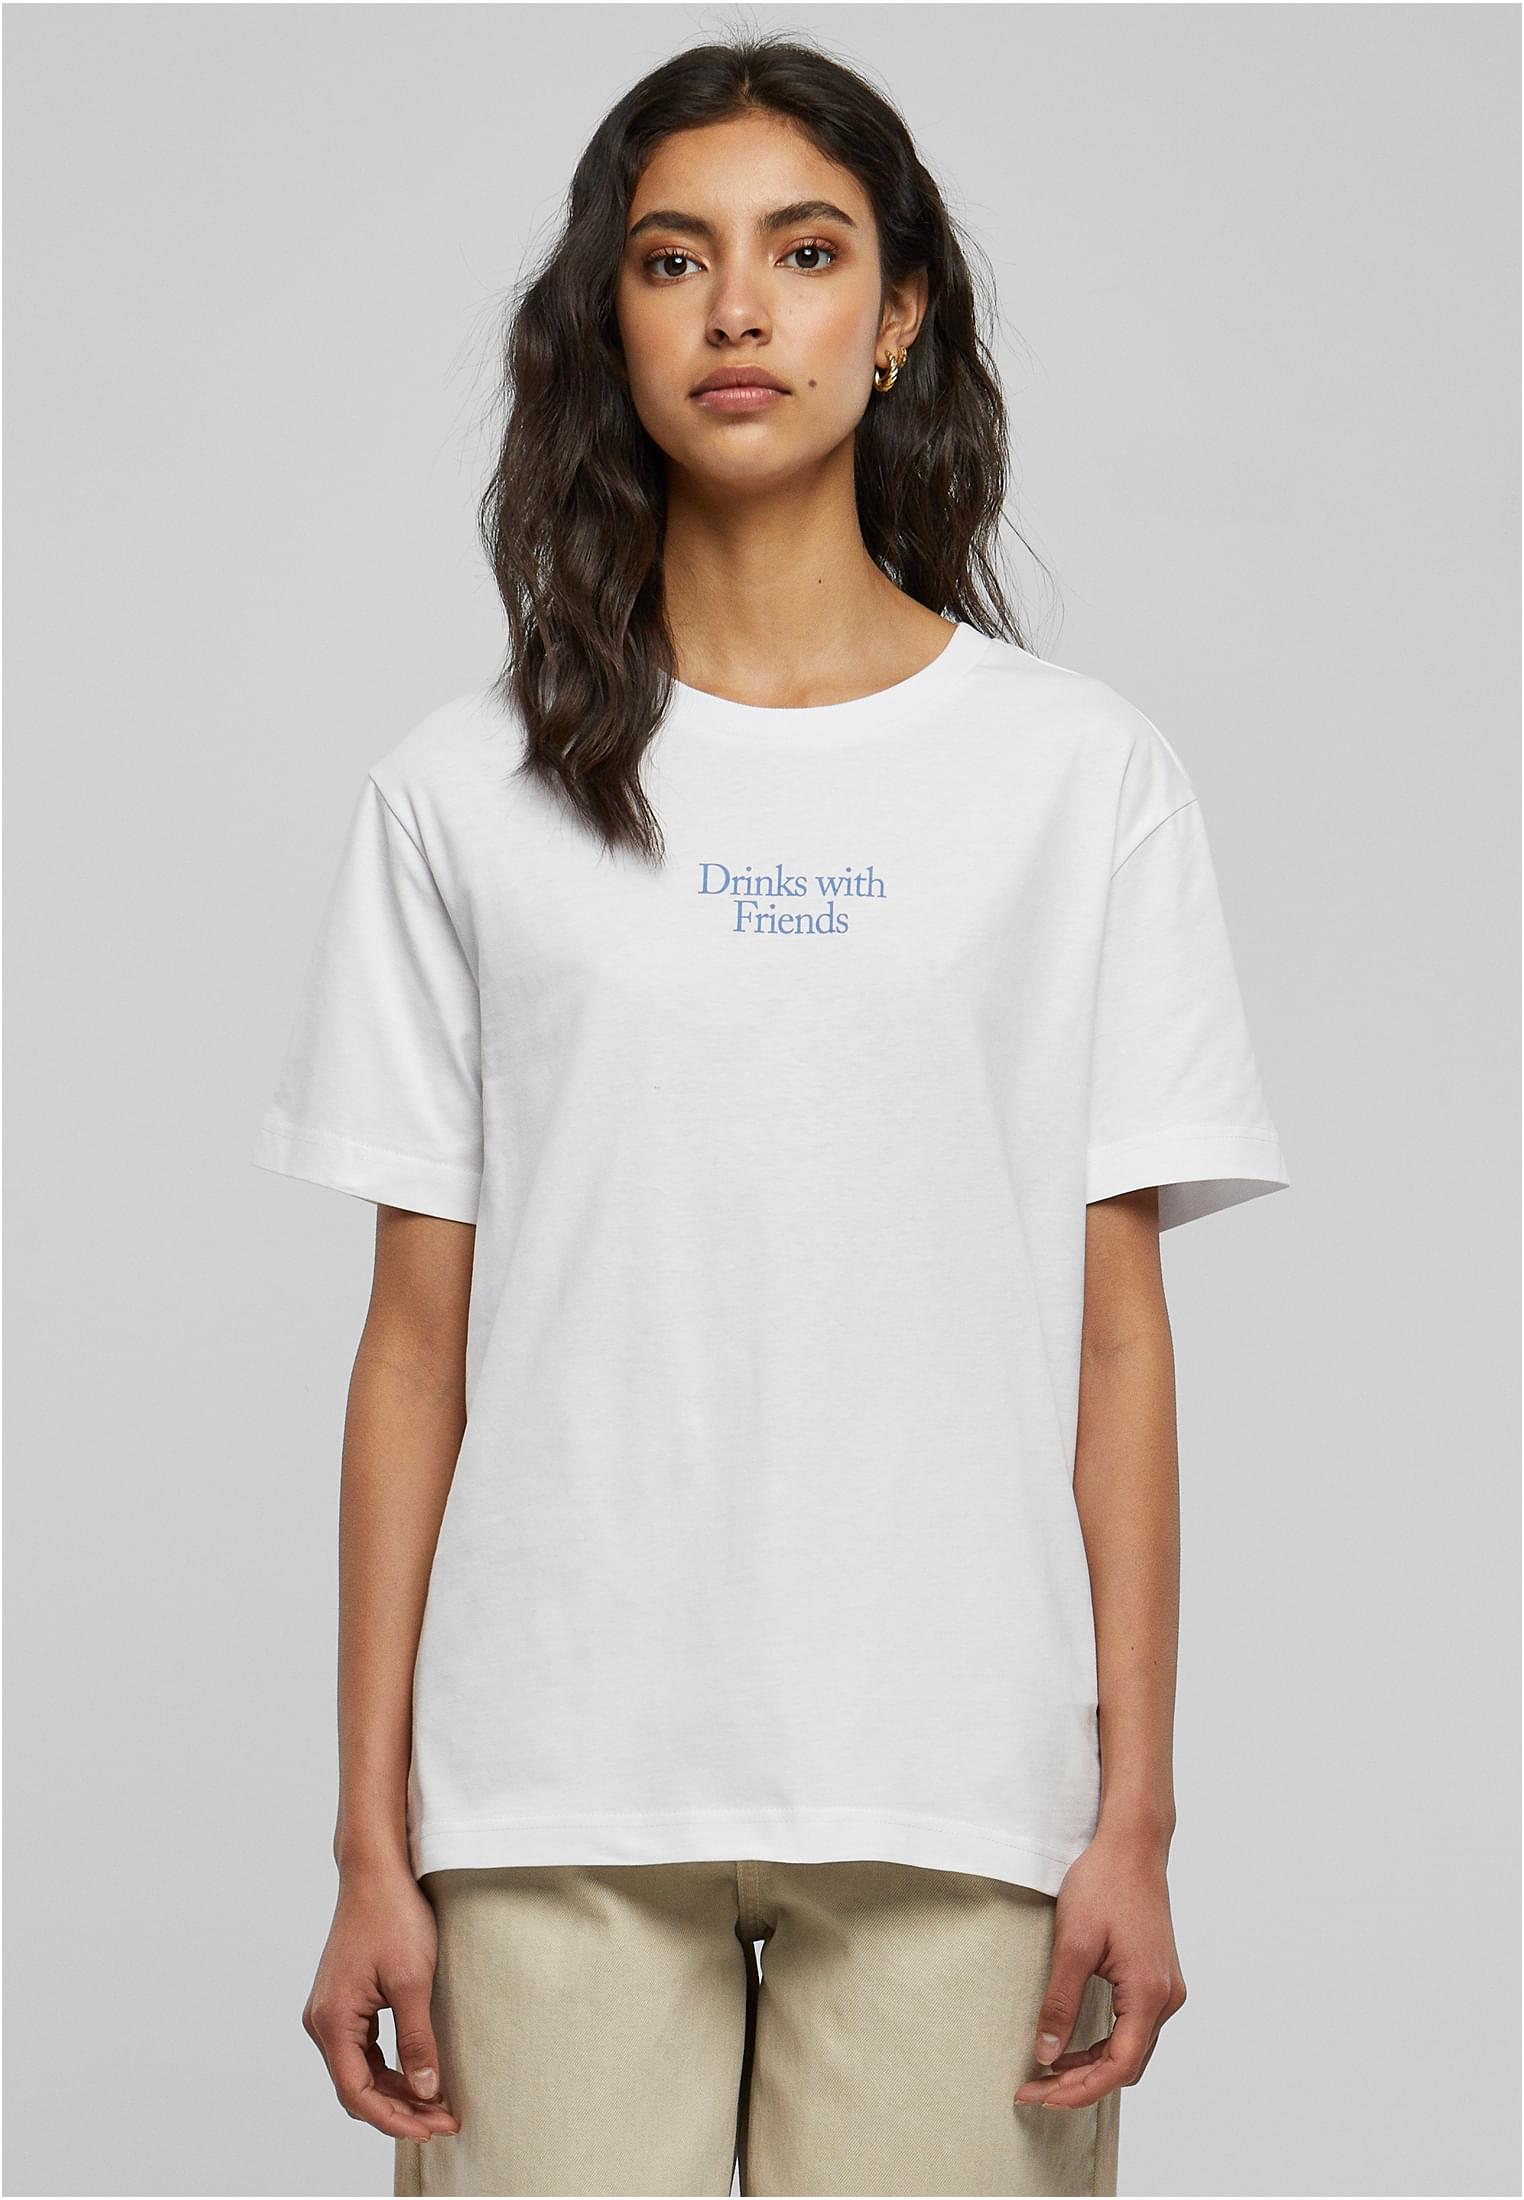 Drinks With Friends Tee White